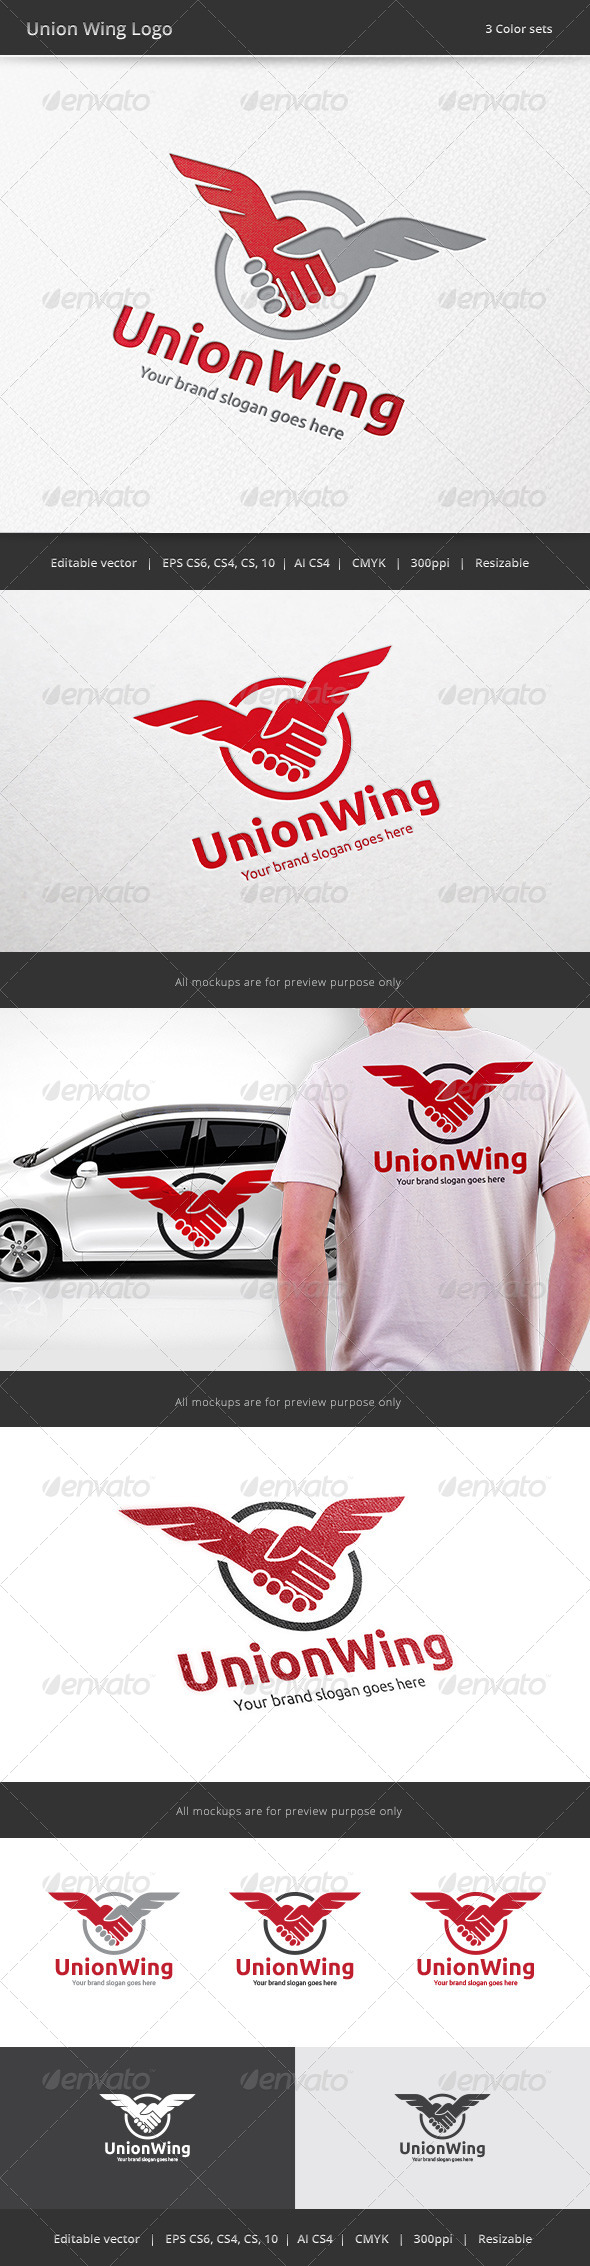 Union Wing Logo - Objects Logo Templates